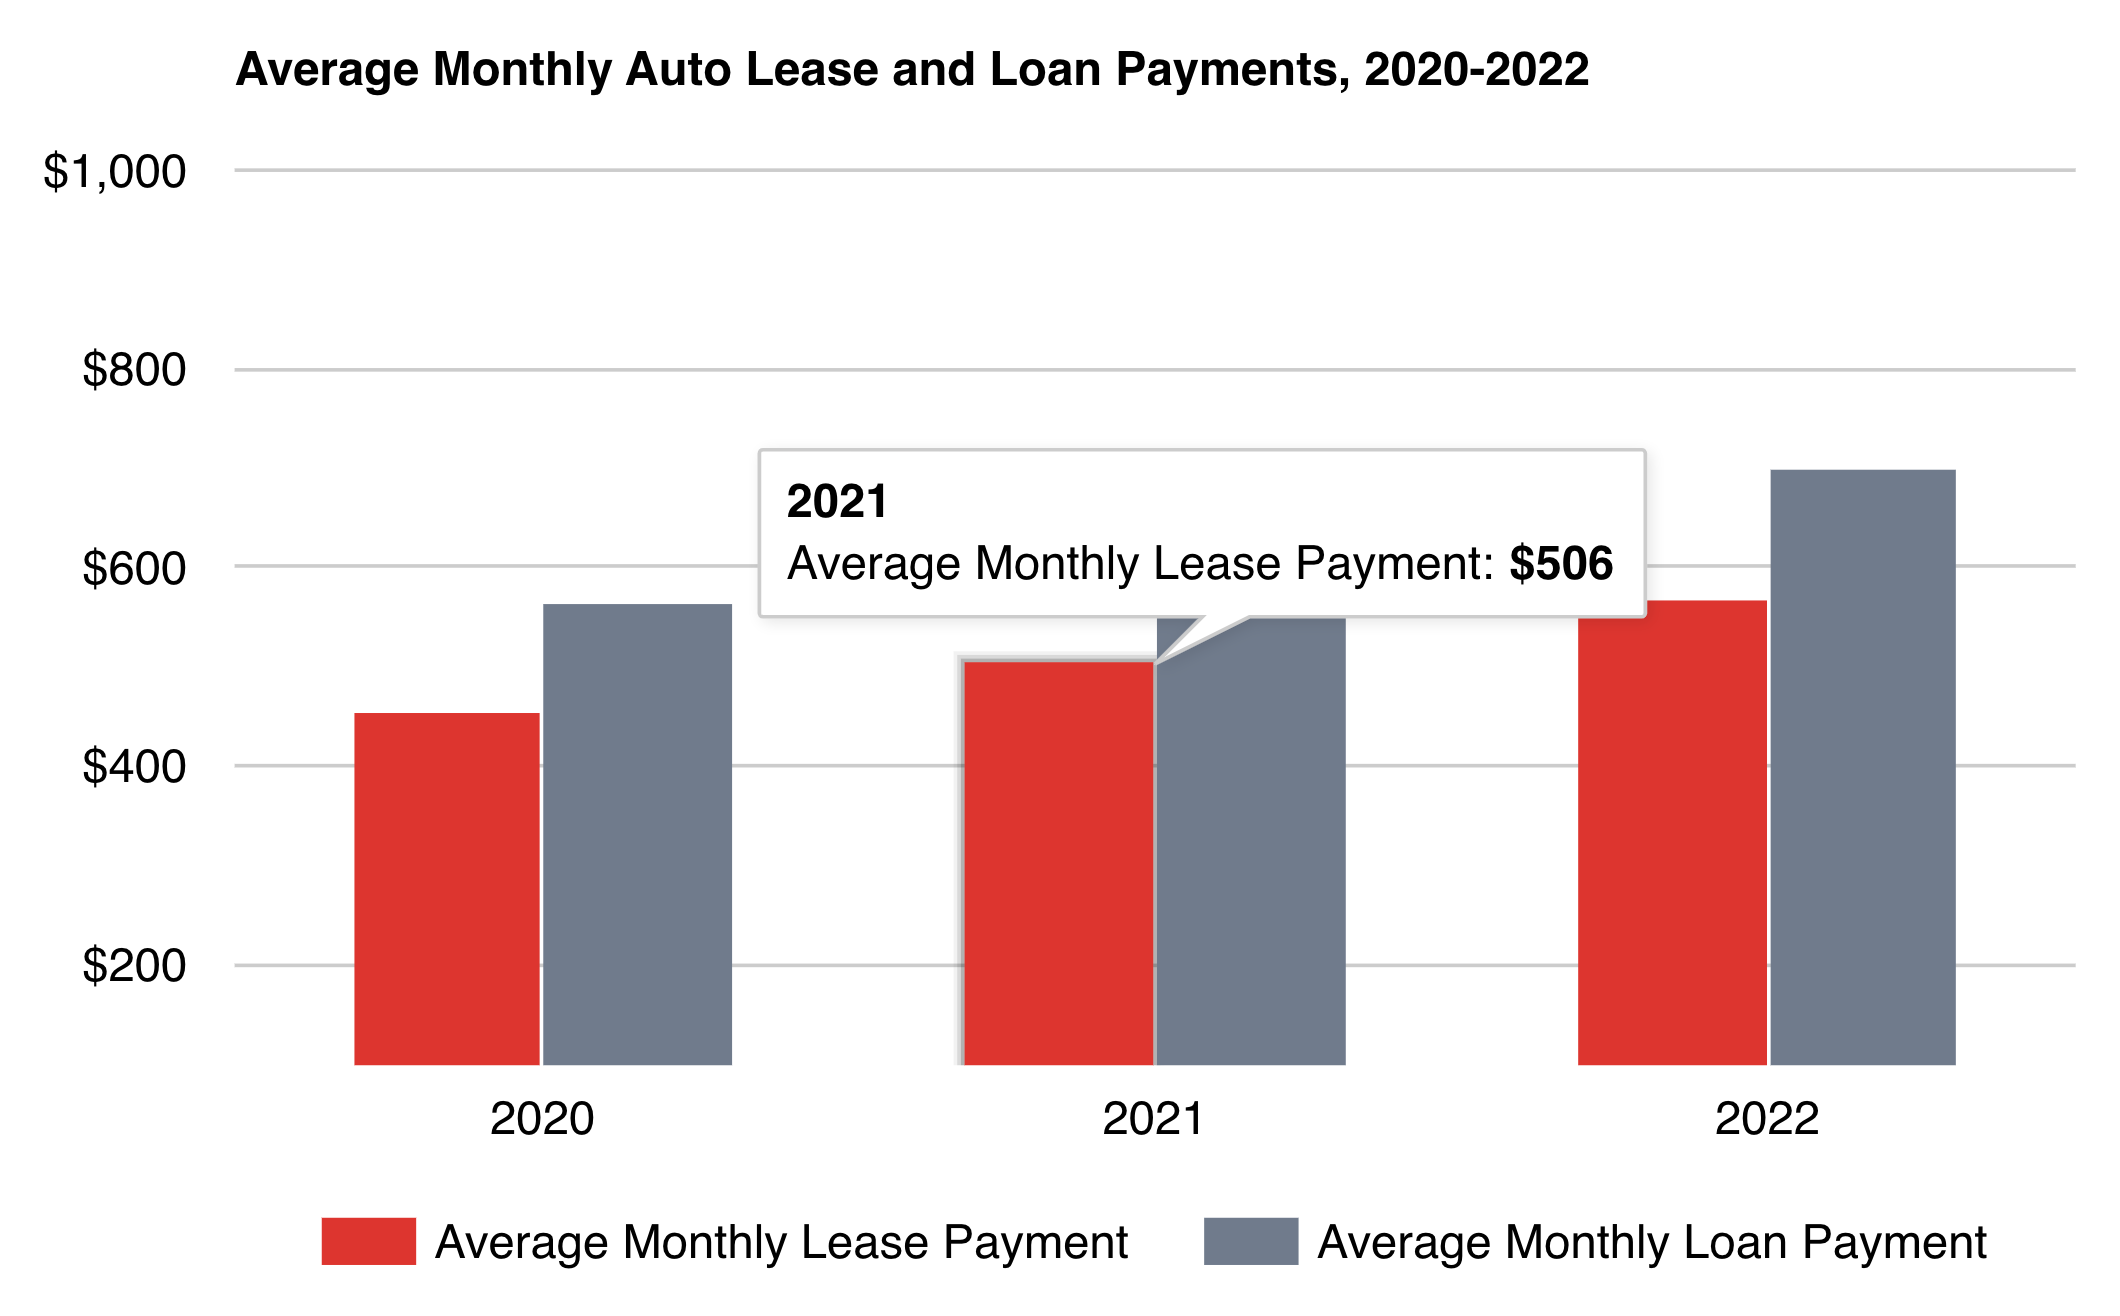 Bar chart showing average monthly auto lease and loan payments from 2020 to 2022.